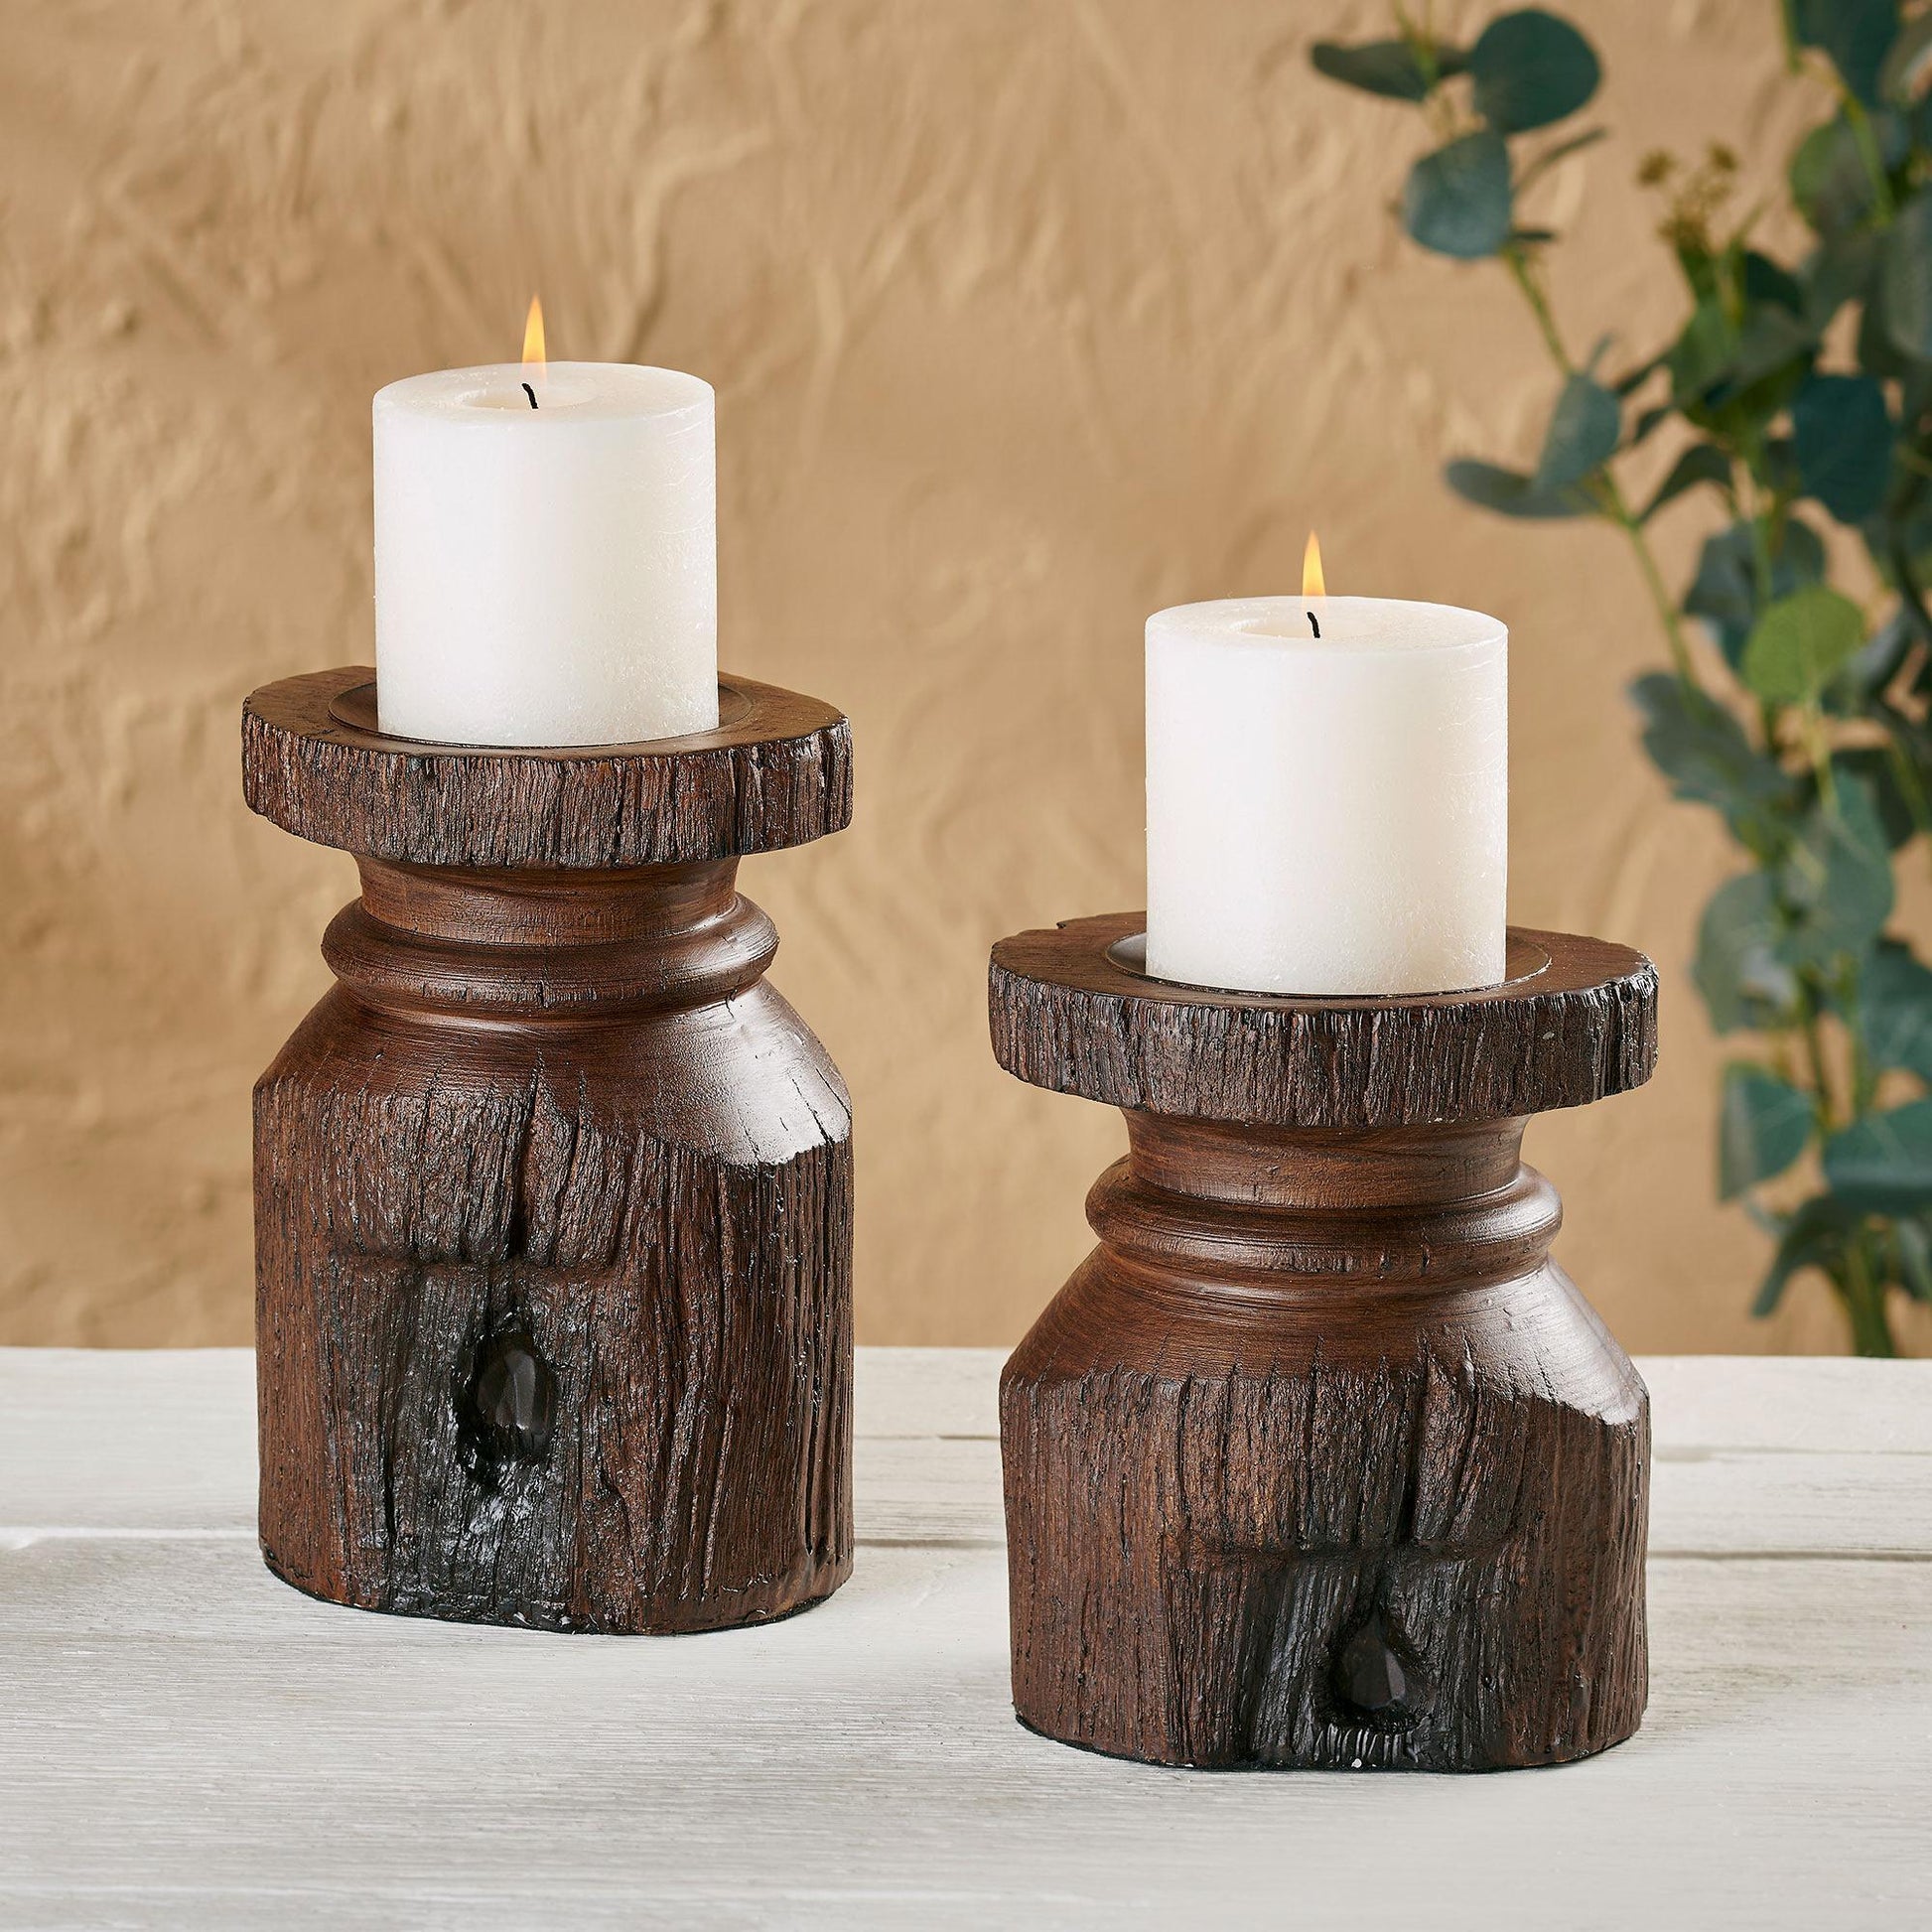 Barn Post-Style Candle Holders - Wild Wings